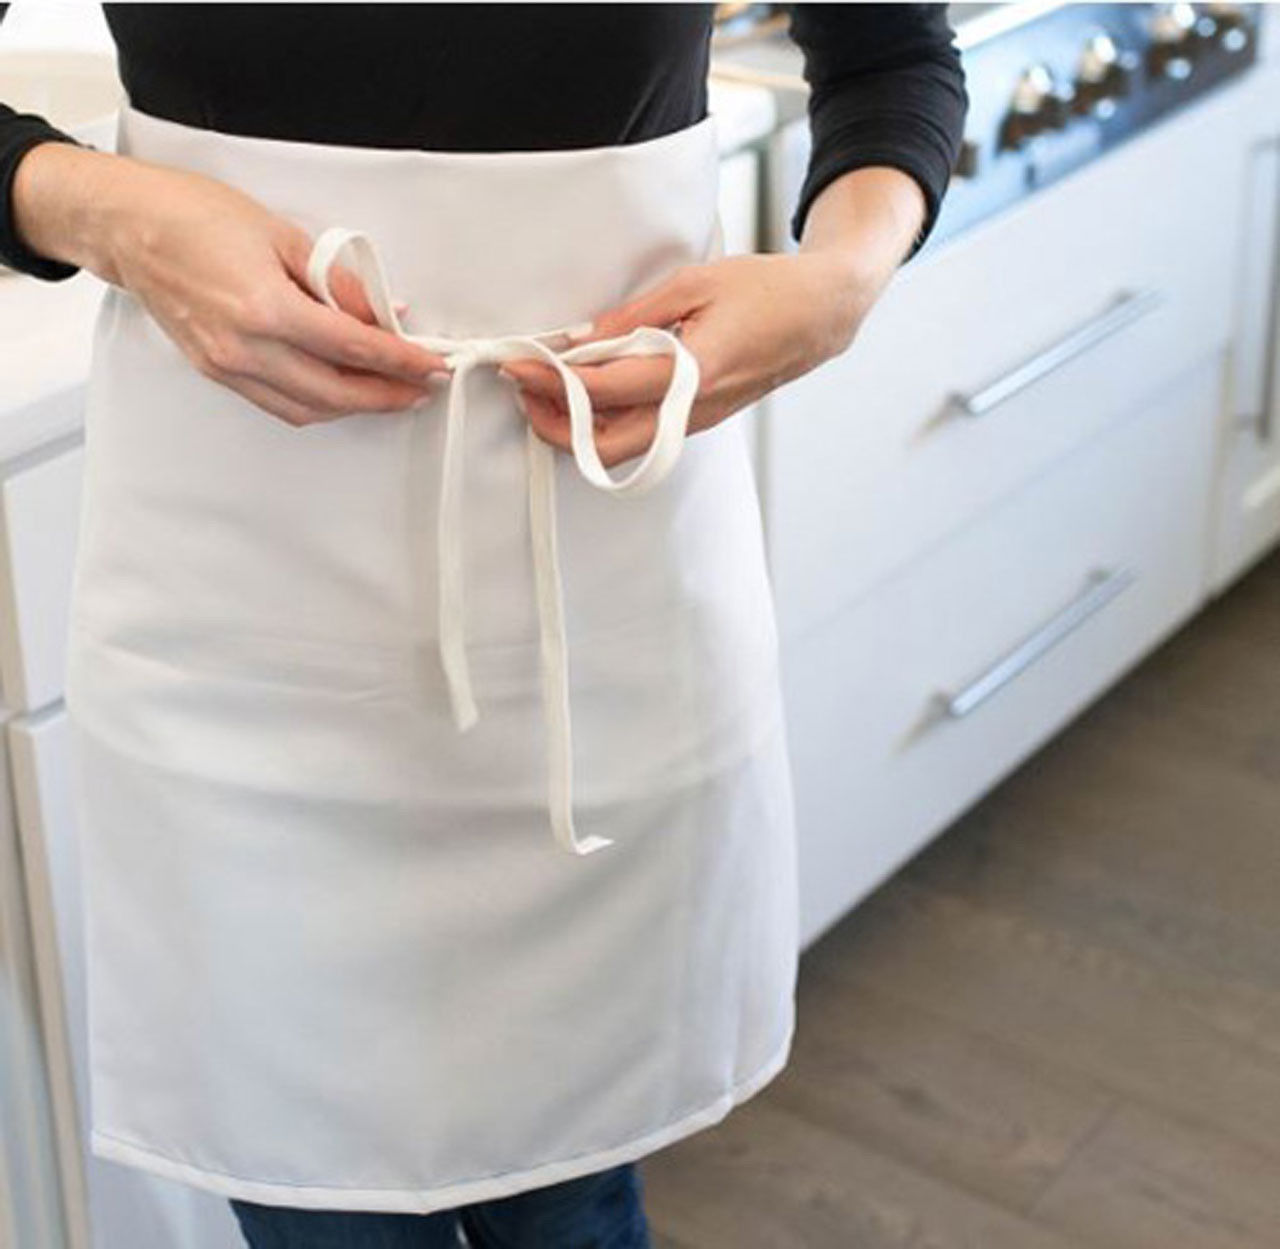 Is the 4 way apron made locally?